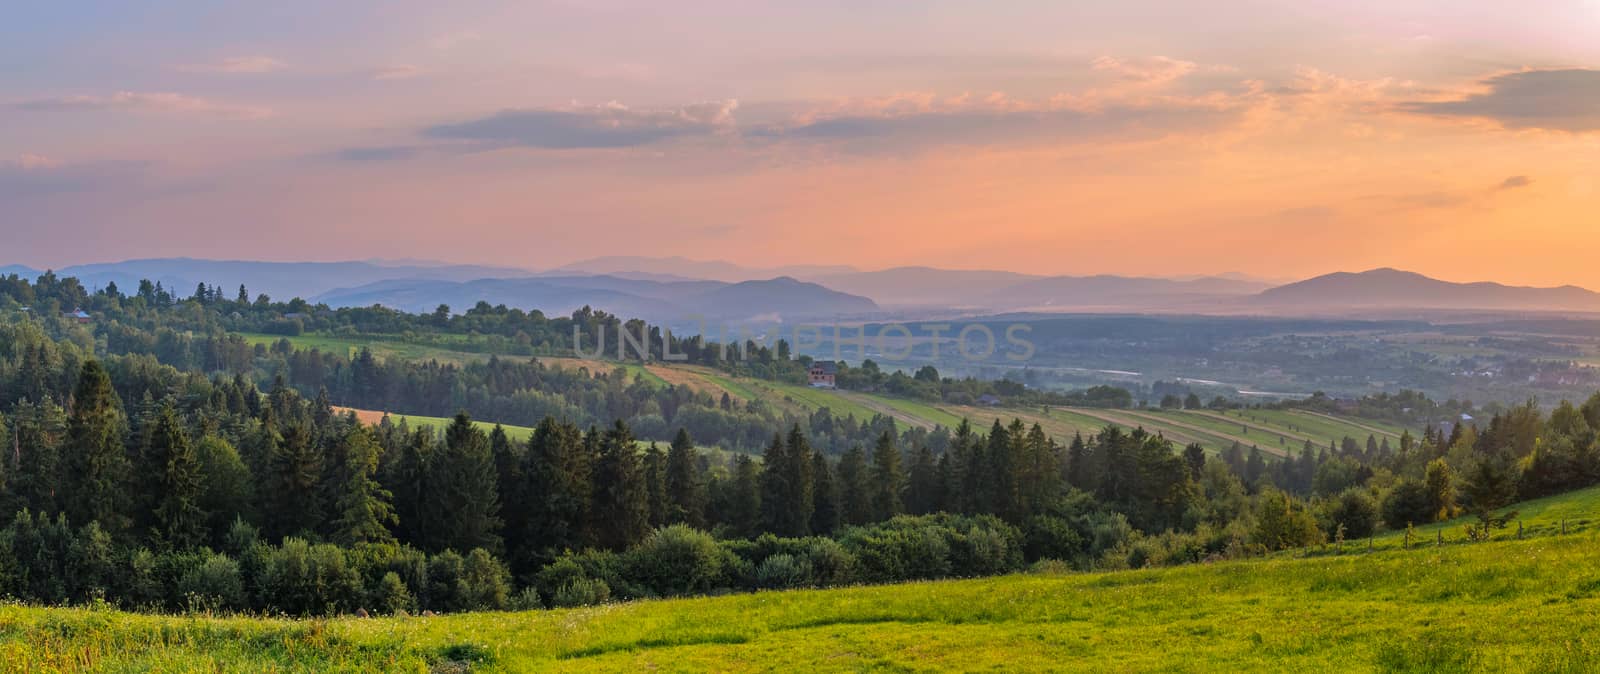 Elegant panorama of the mountainous terrain with valleys forest planting beautiful peaks in the distance against the background of the evening sky. by Adamchuk